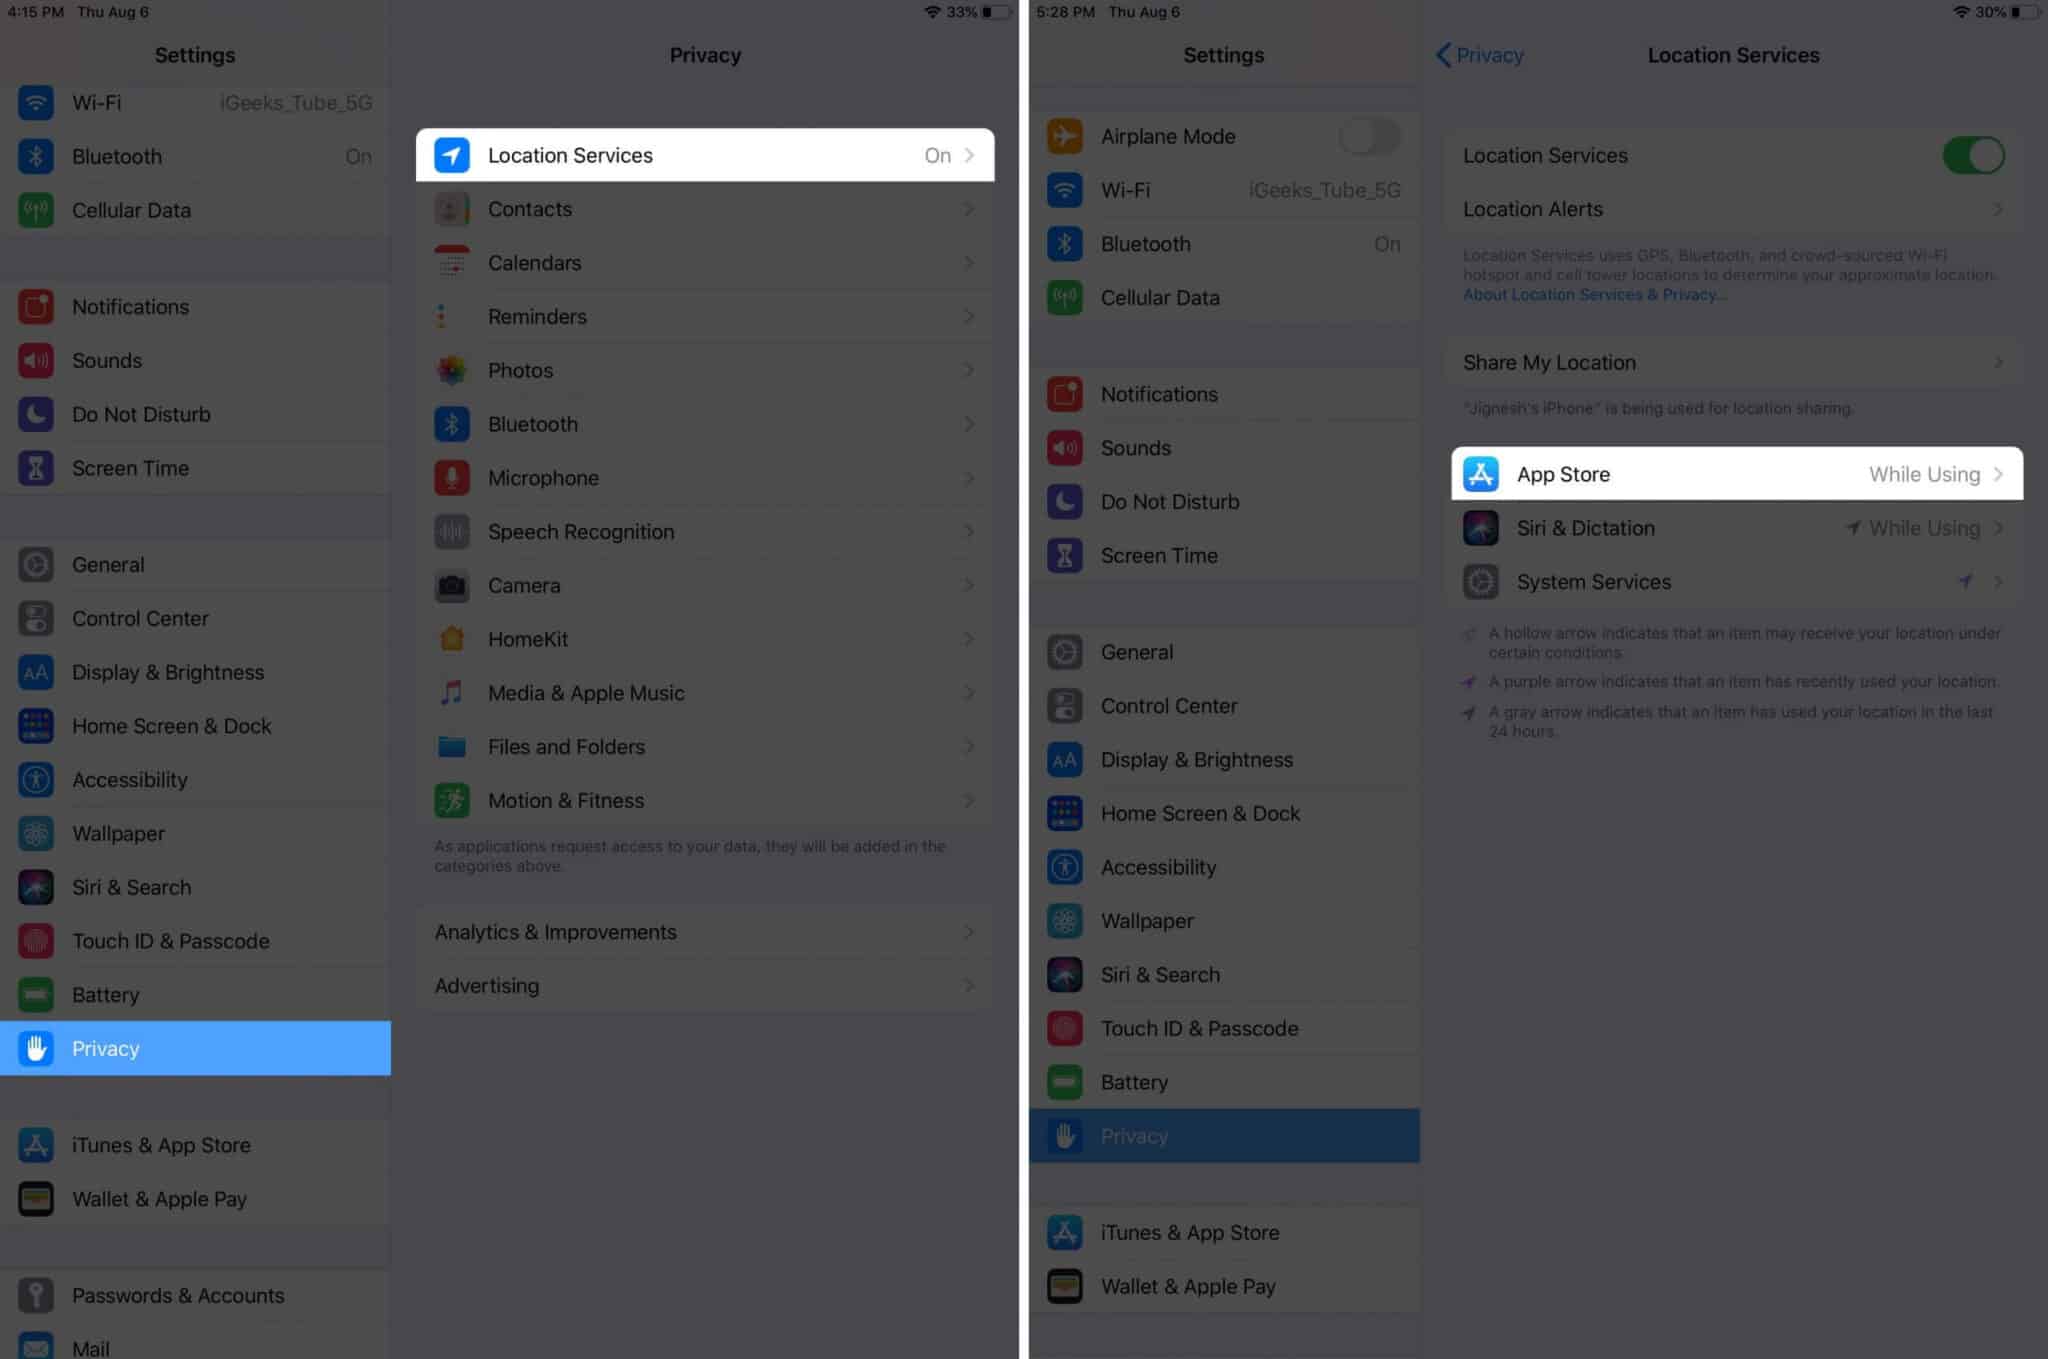 tap on privacy and location services then tap on app on ipad